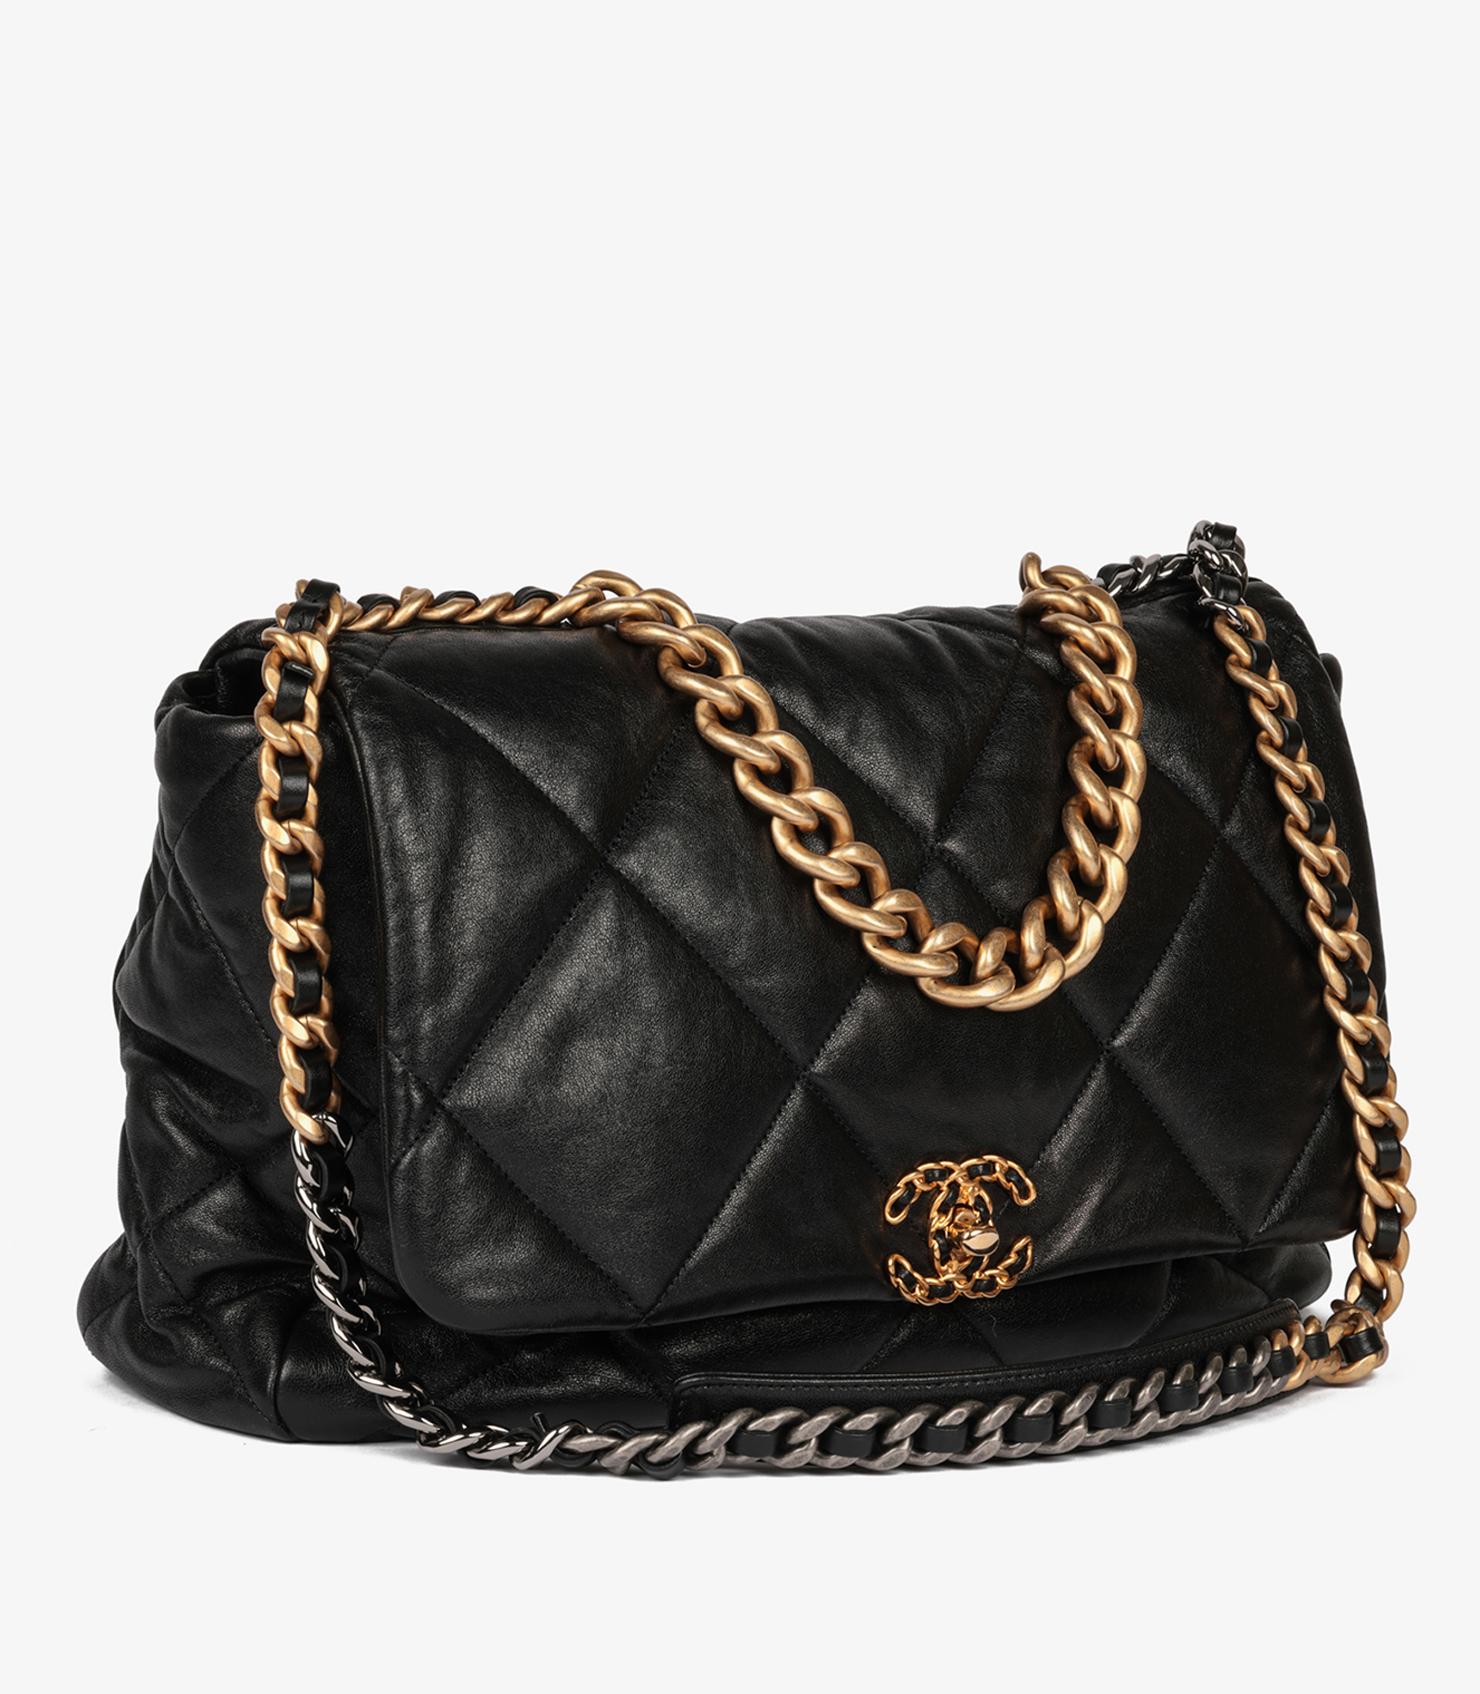 Chanel Black Quilted Lambskin Maxi 19 Flap Bag 3